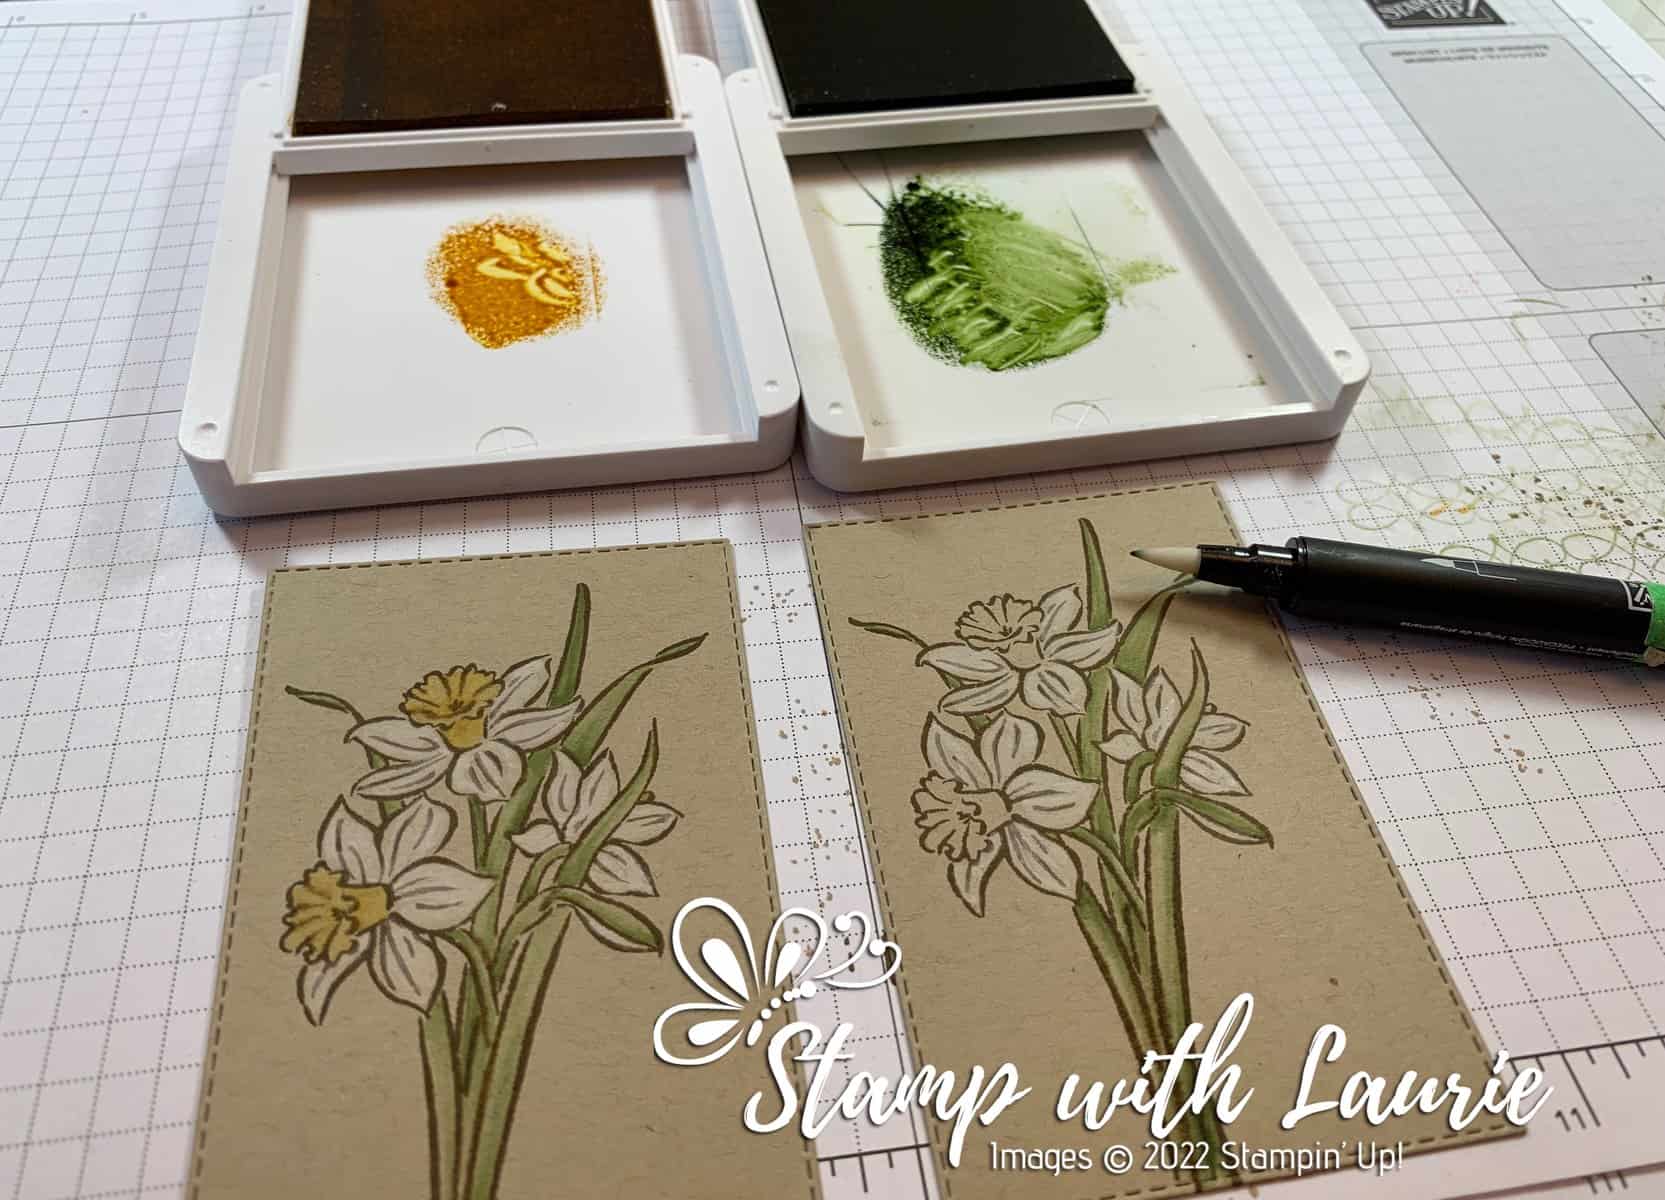 Stampin' Up! Brushed Metallic Cardstock Wins the Poll!